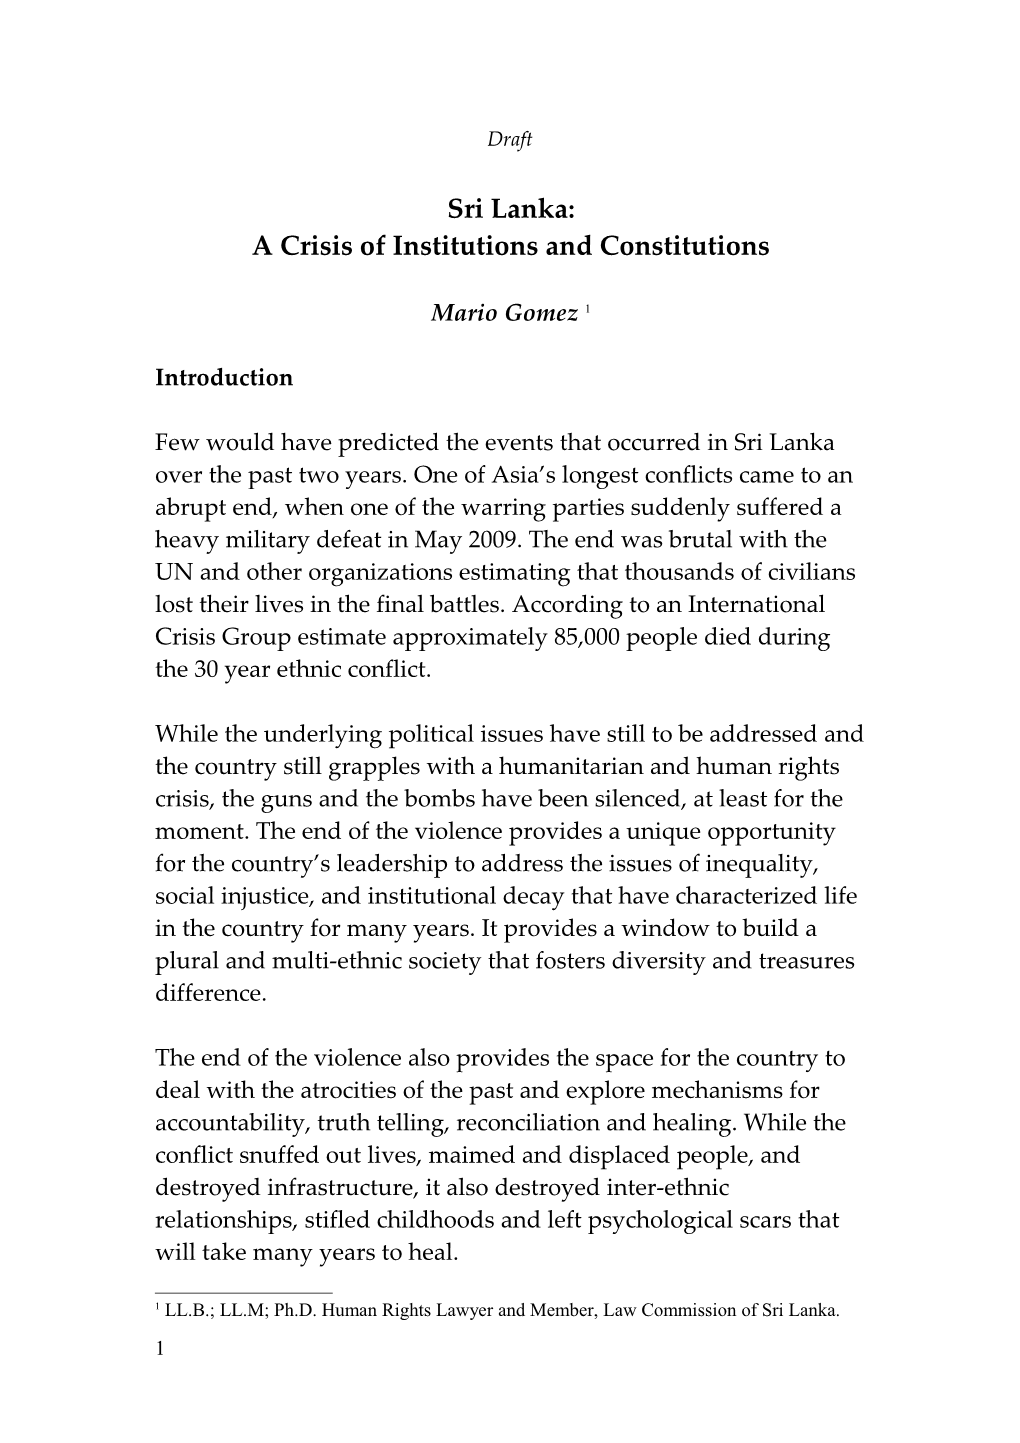 A Crisis of Institutions and Constitutions